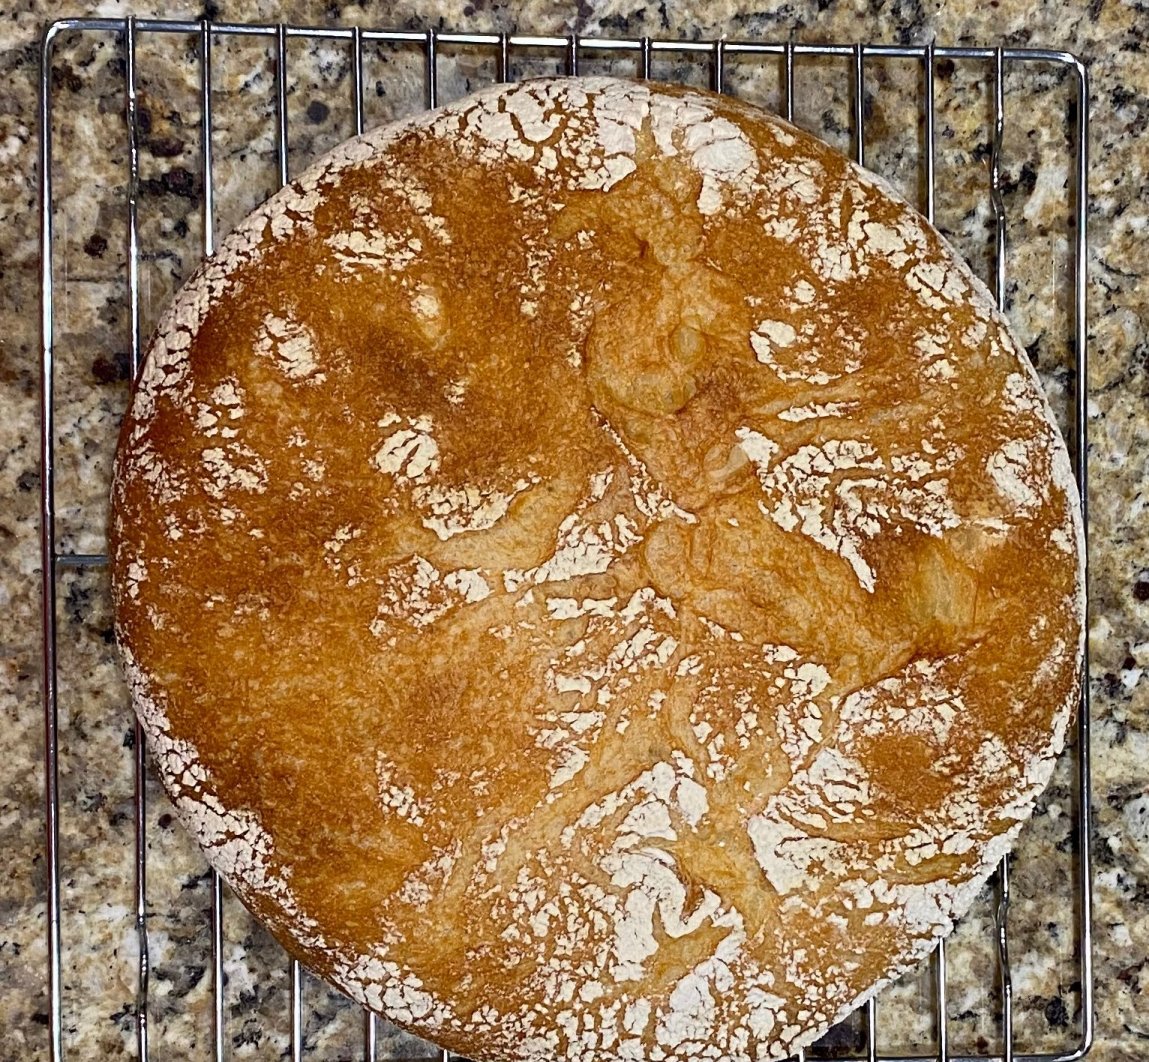 Finished bread from above